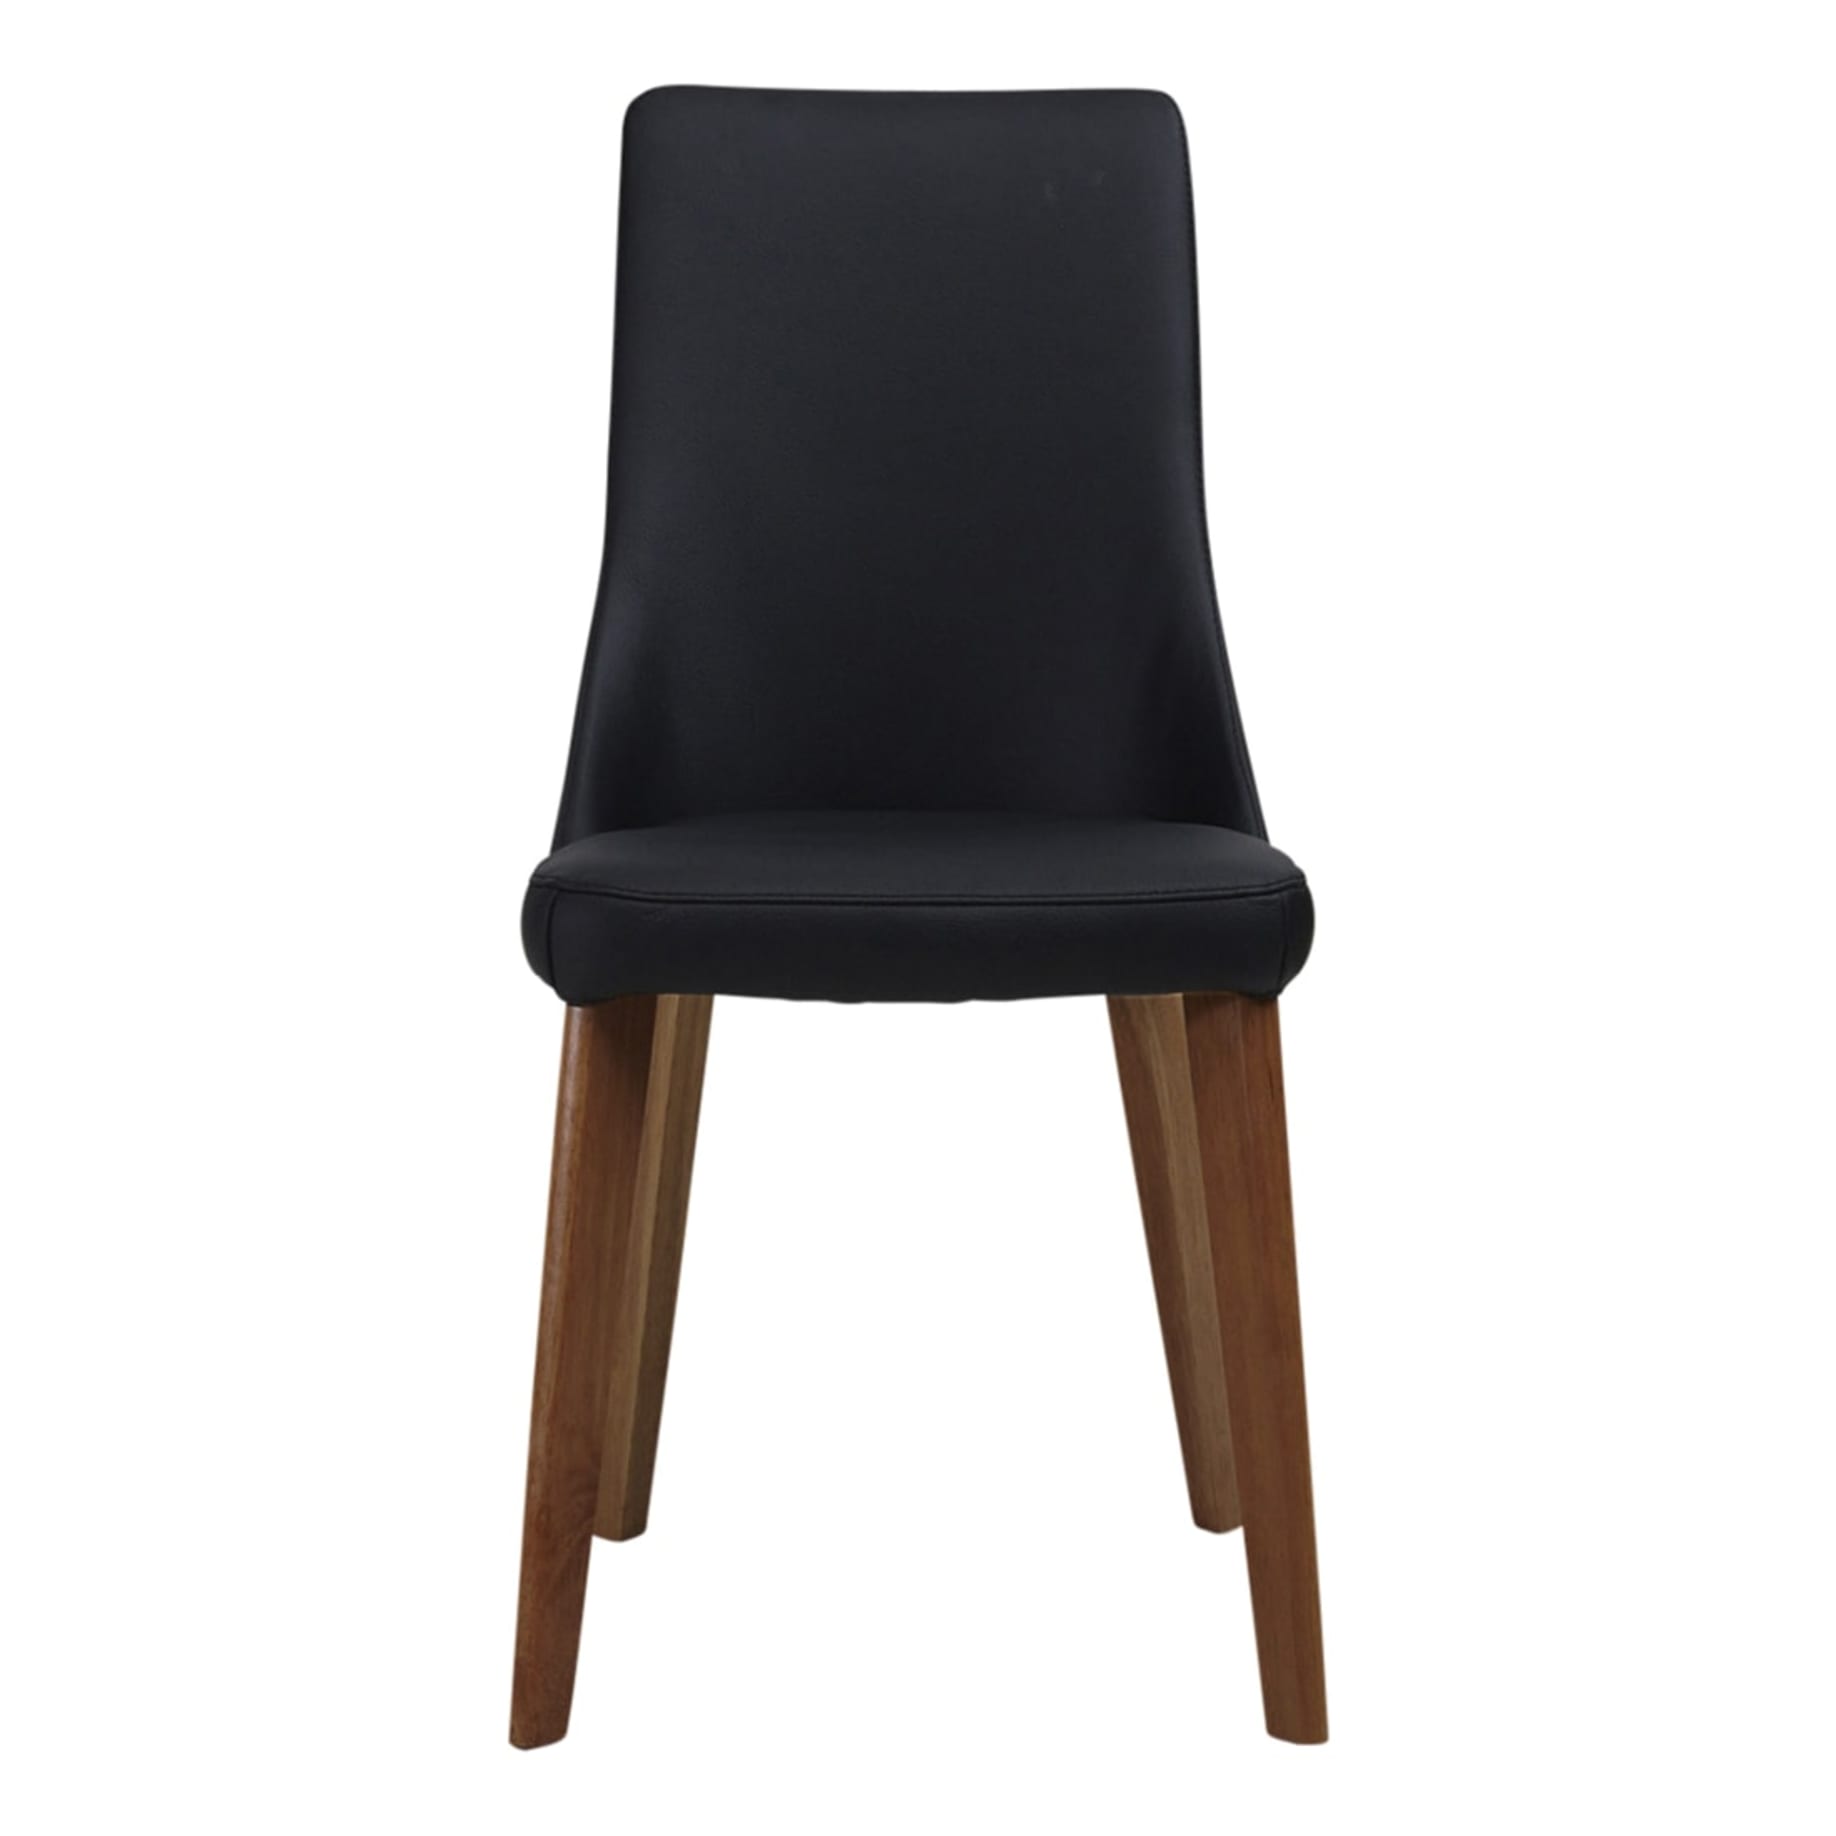 Panama Dining Chair in Leather Black / Blackwood Stain